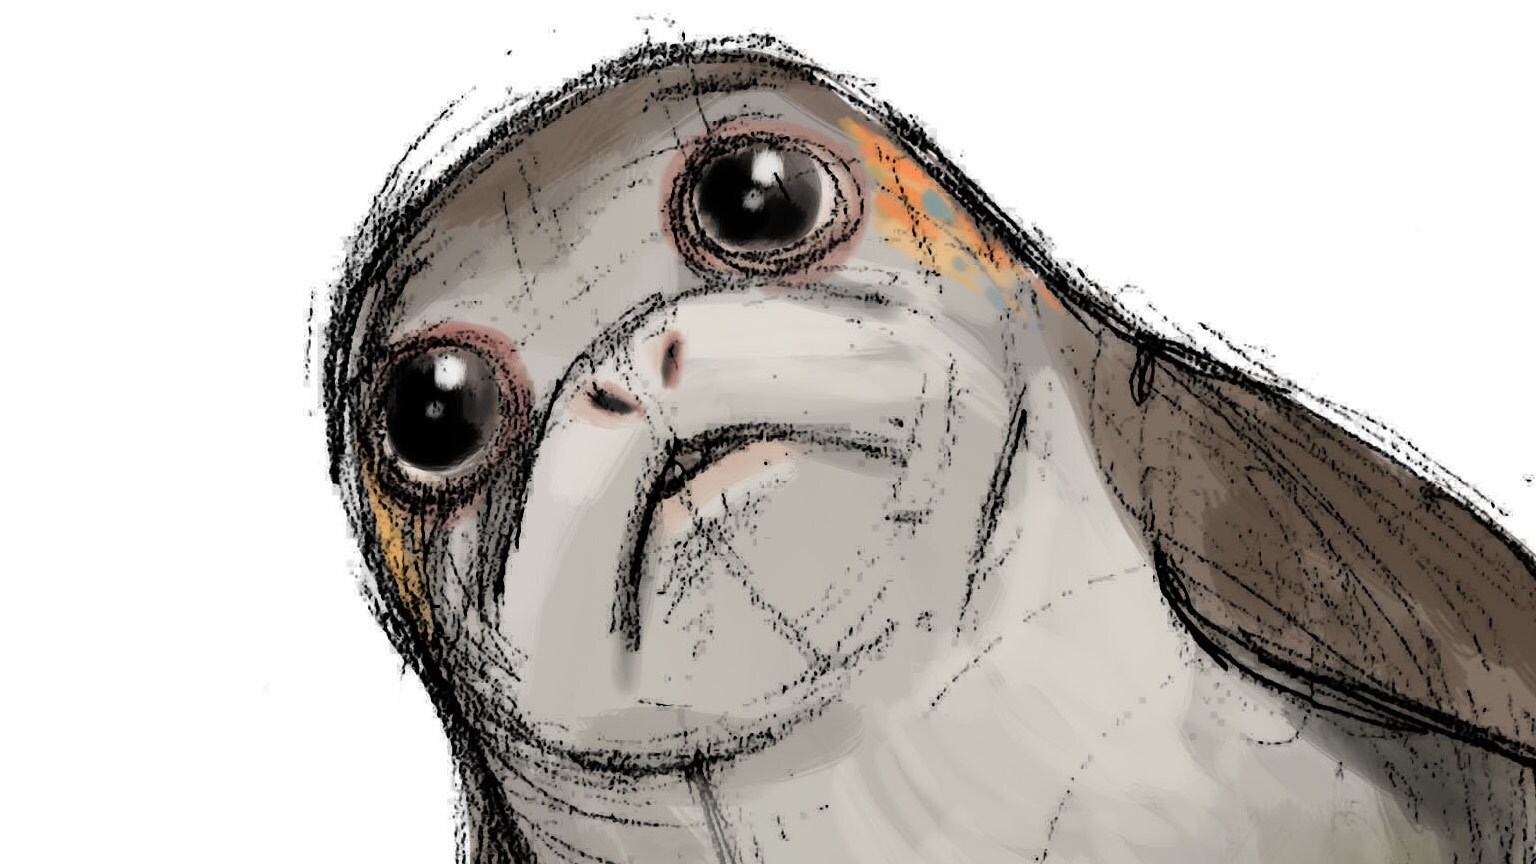 Introducing Porgs, the Cute New Creatures from Star Wars: The Last Jedi